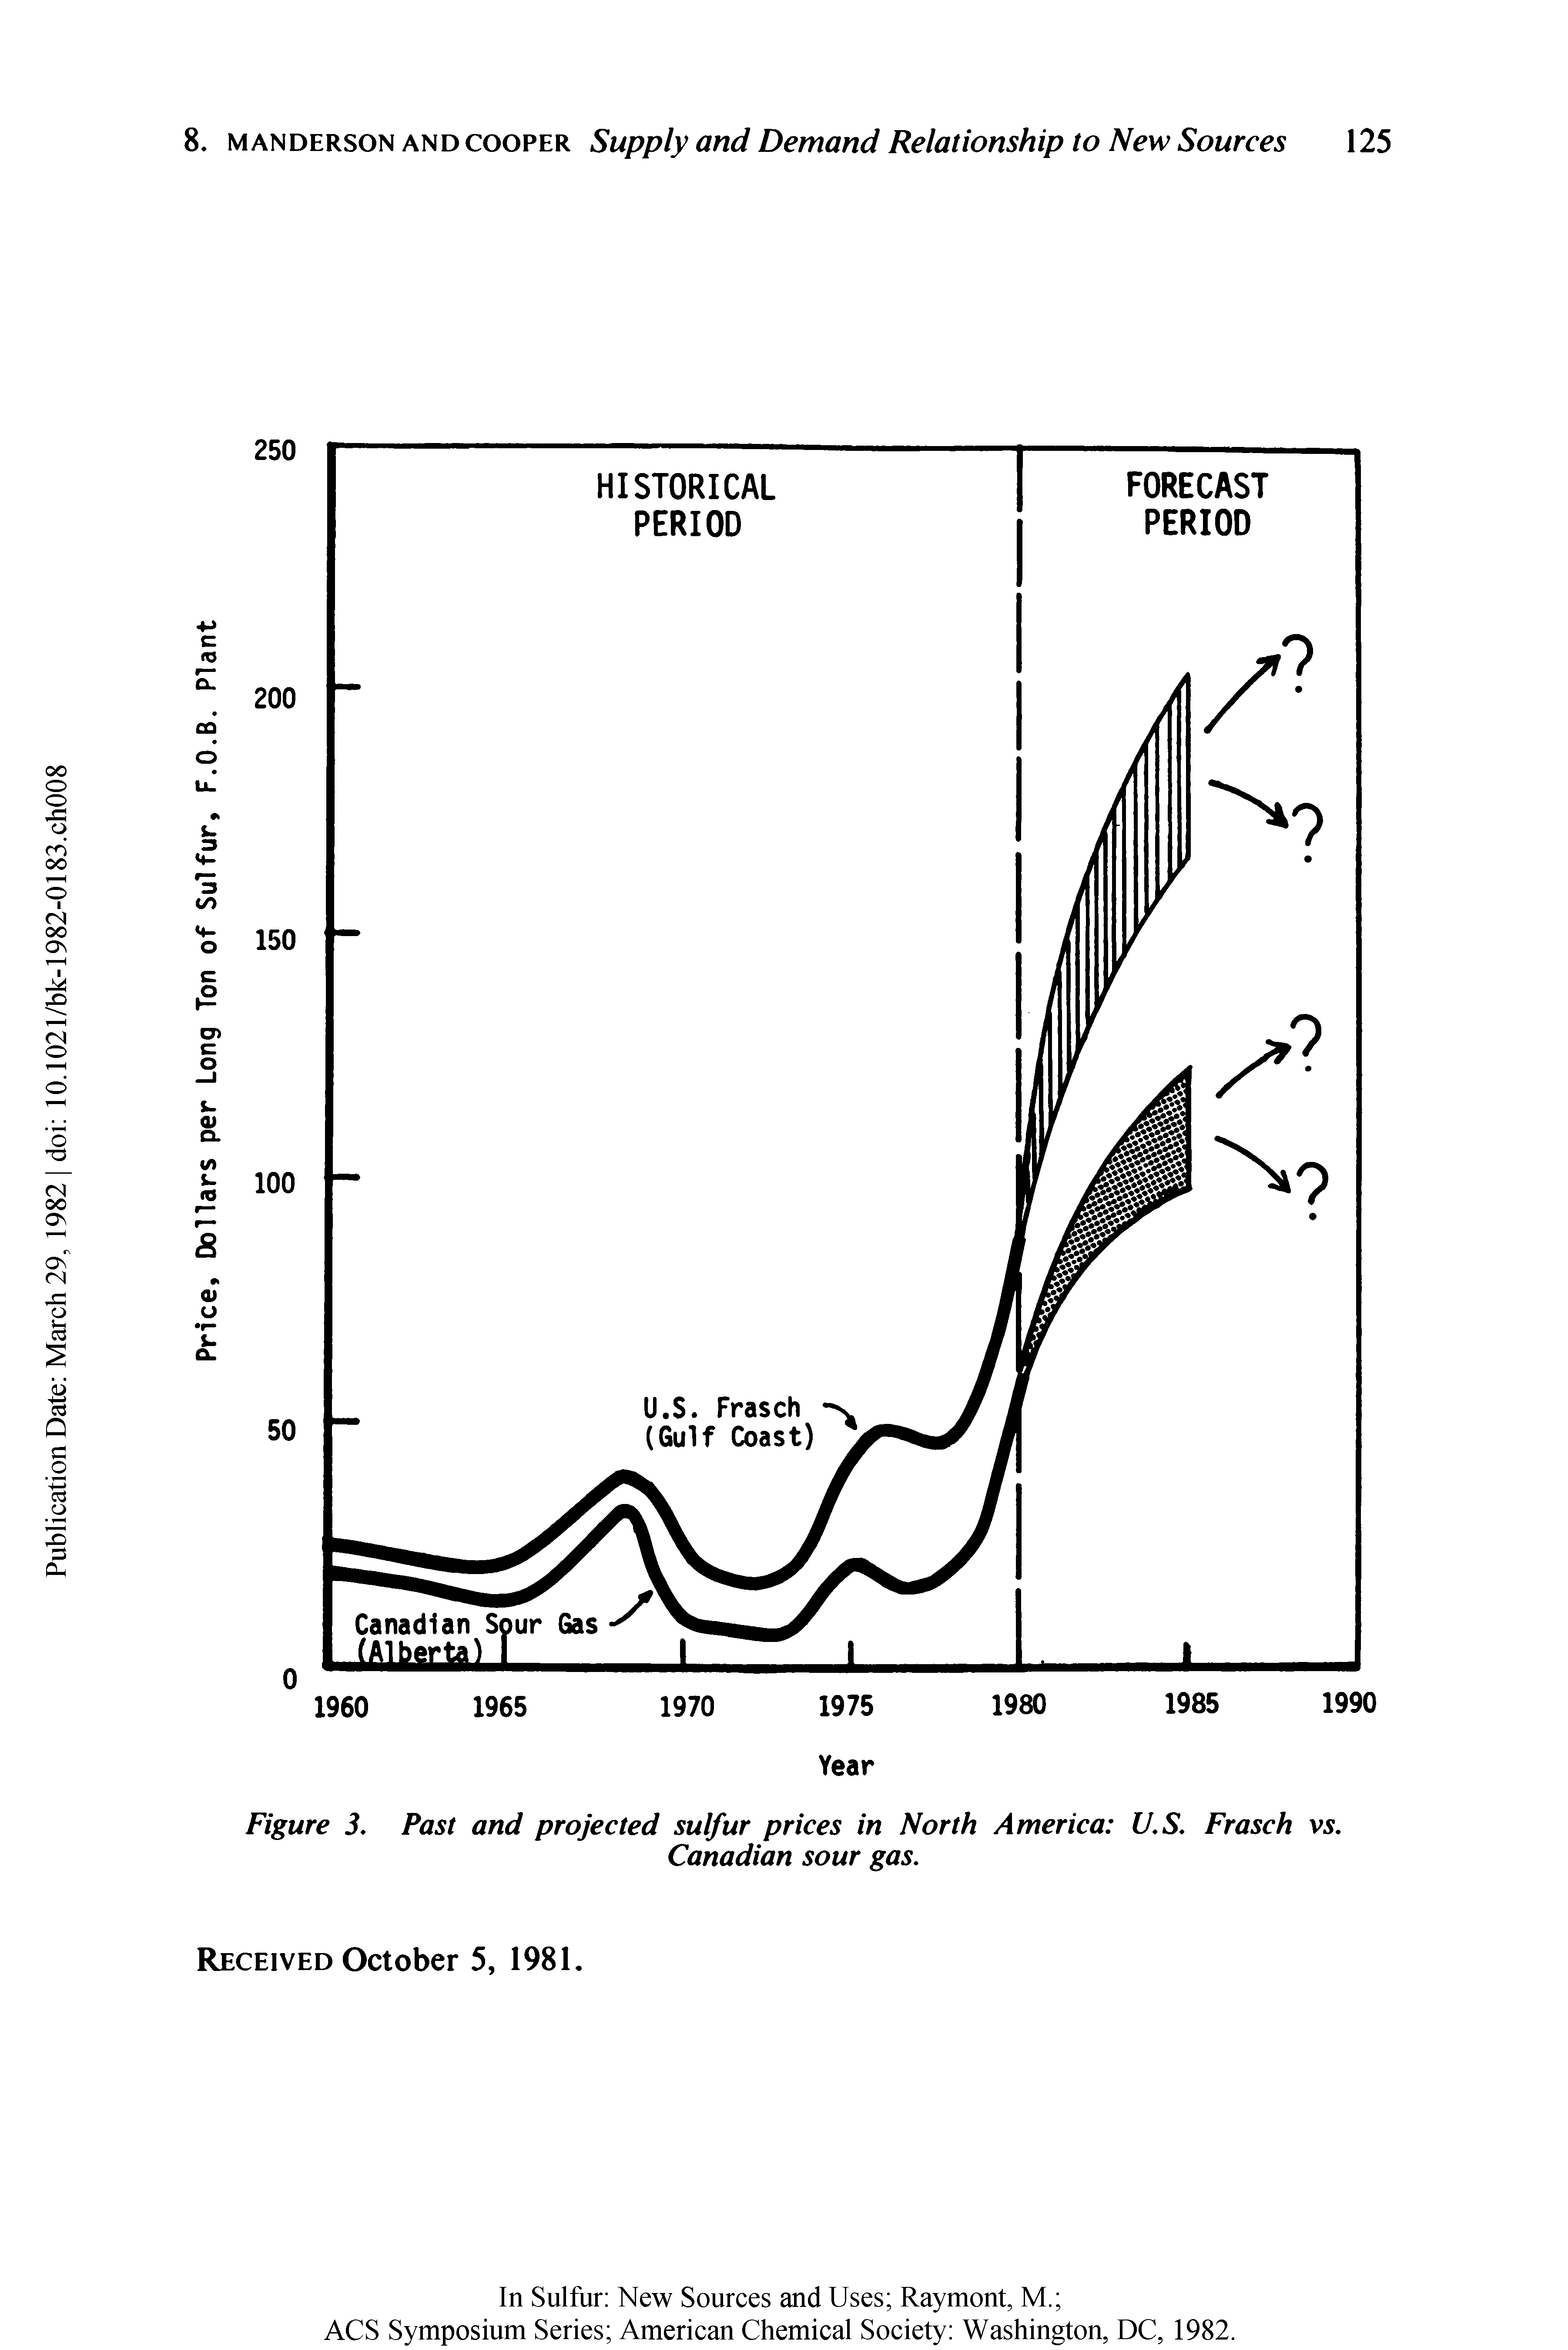 Figure 3. Past and projected sulfur prices in North America U.S. Frasch vs.